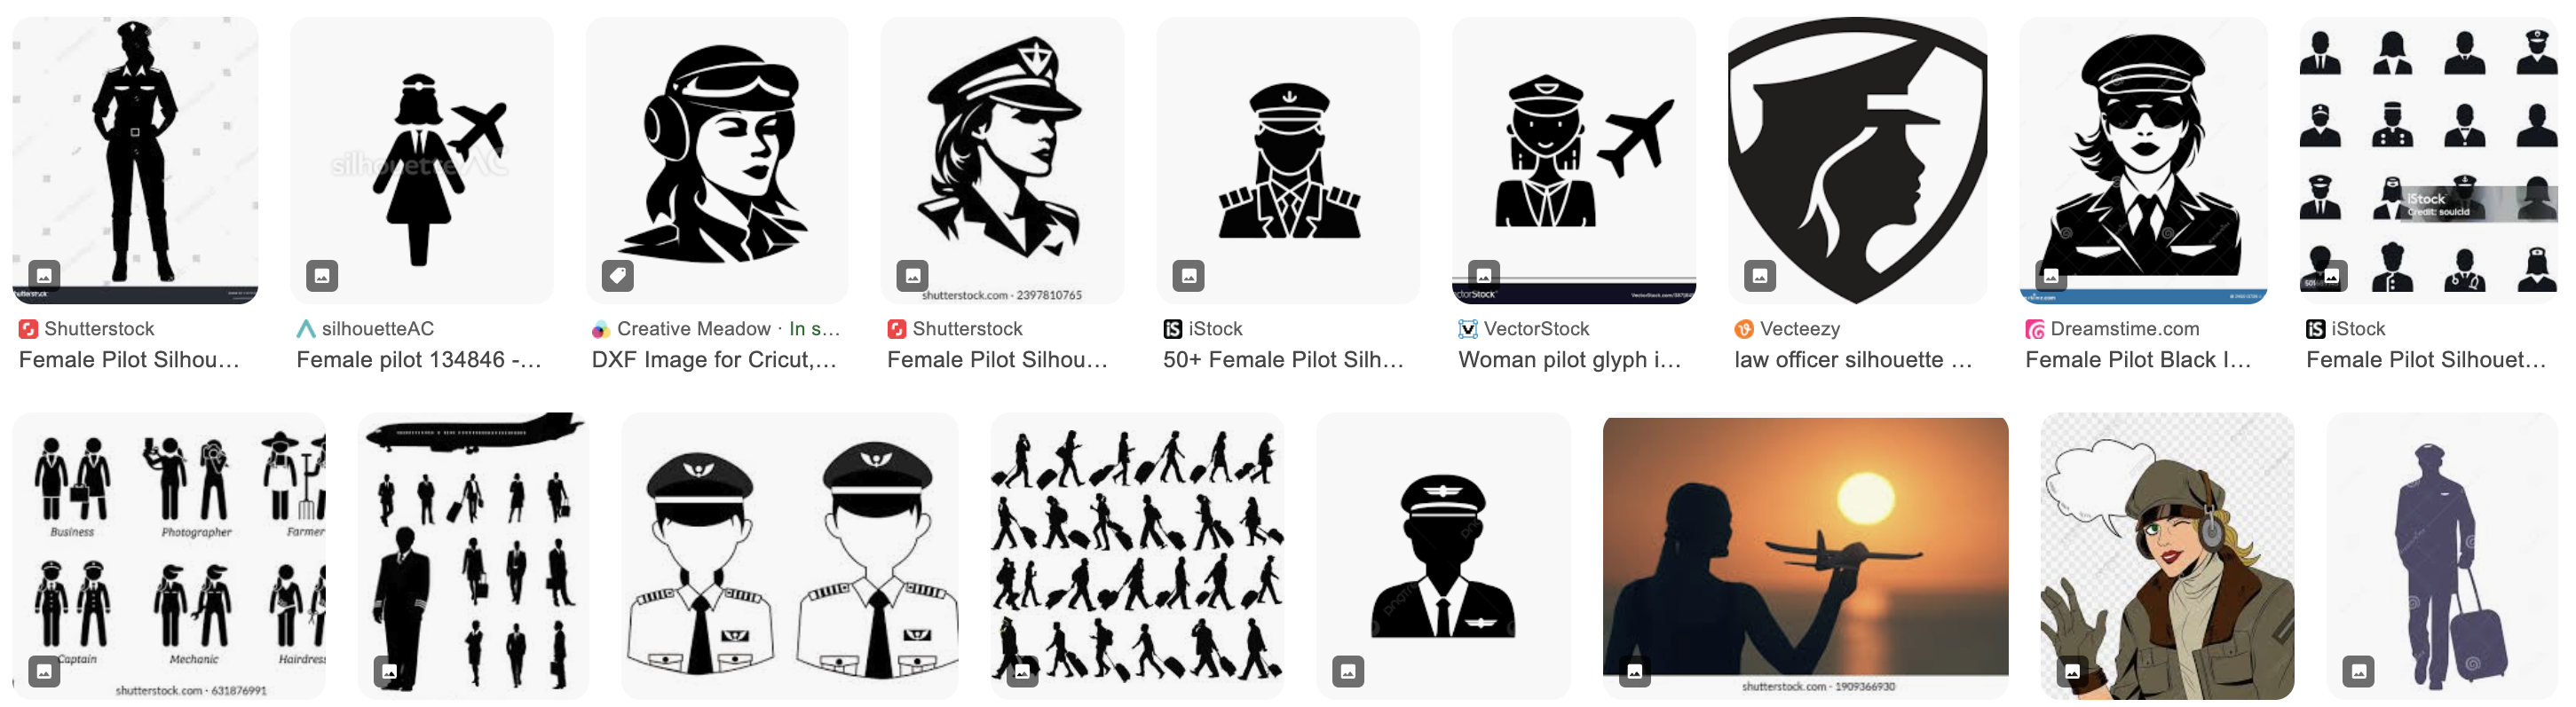 Screenshot of top google image search results for pilot silhouette female